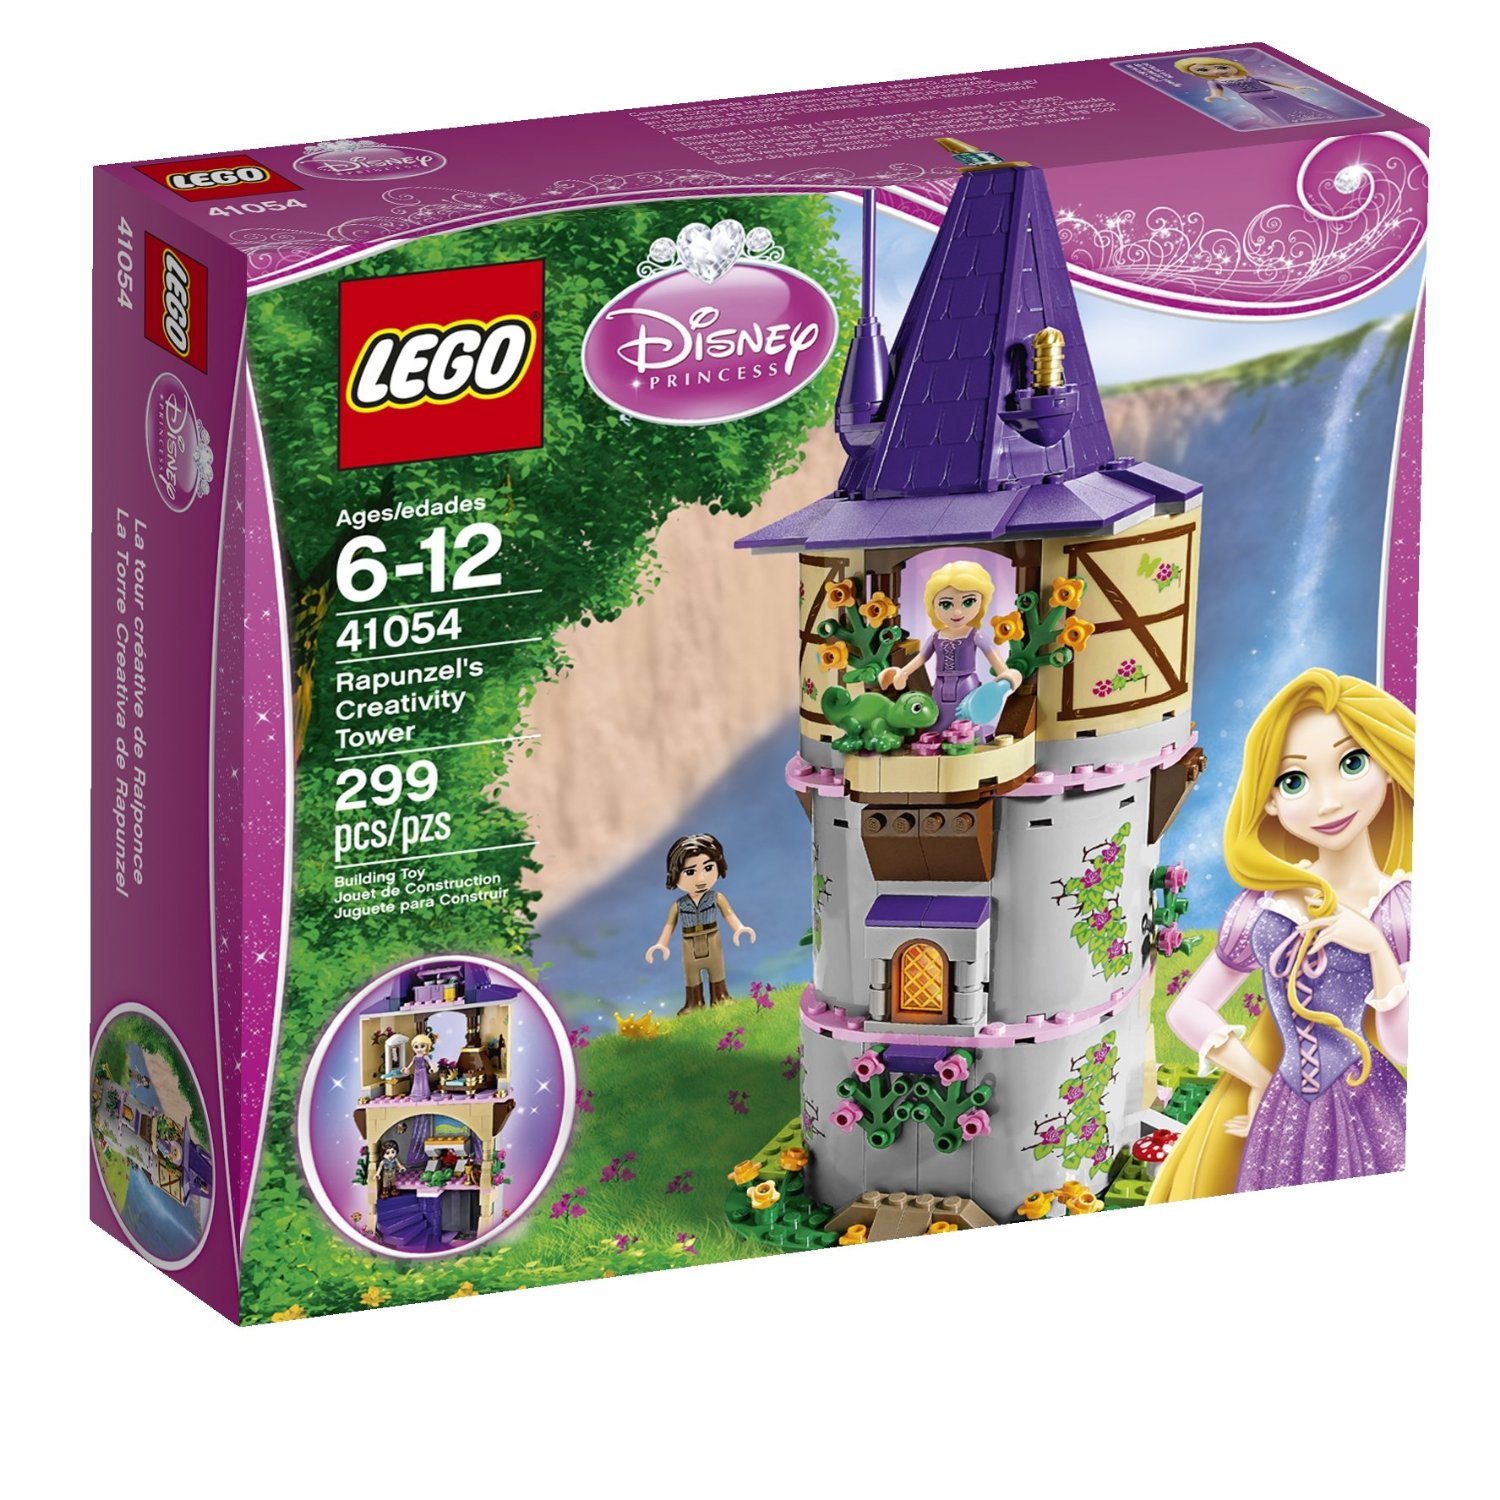 New Lego Disney Princess Sets Starting At 19 99 My Frugal Adventures